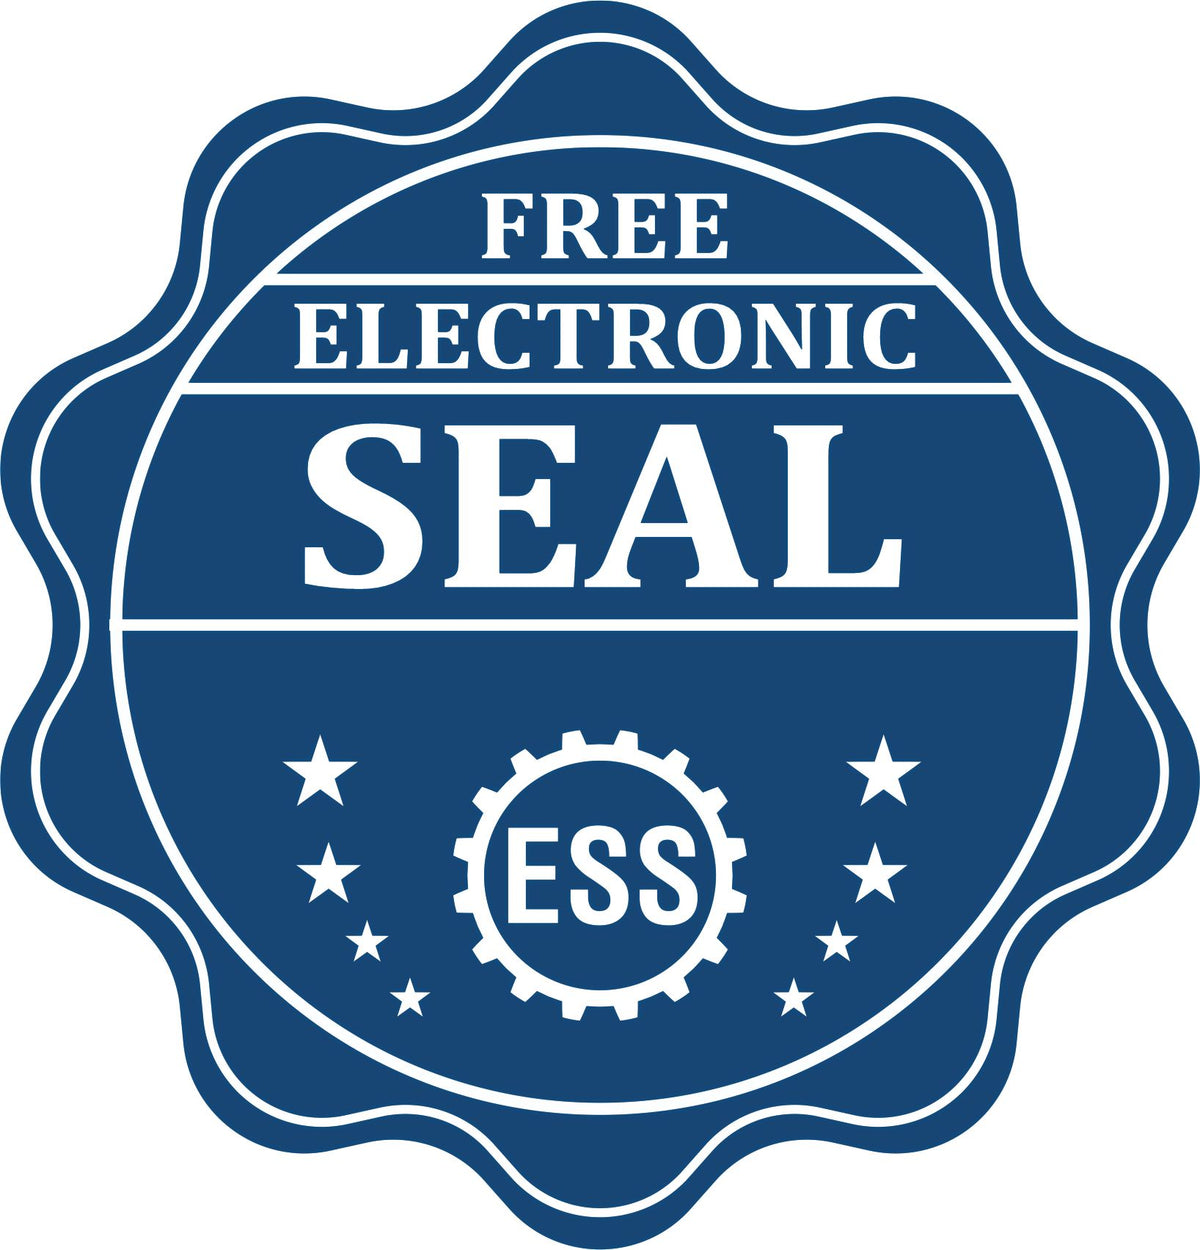 A badge showing a free electronic seal for the Gift Vermont Engineer Seal with stars and the ESS gear on the emblem.